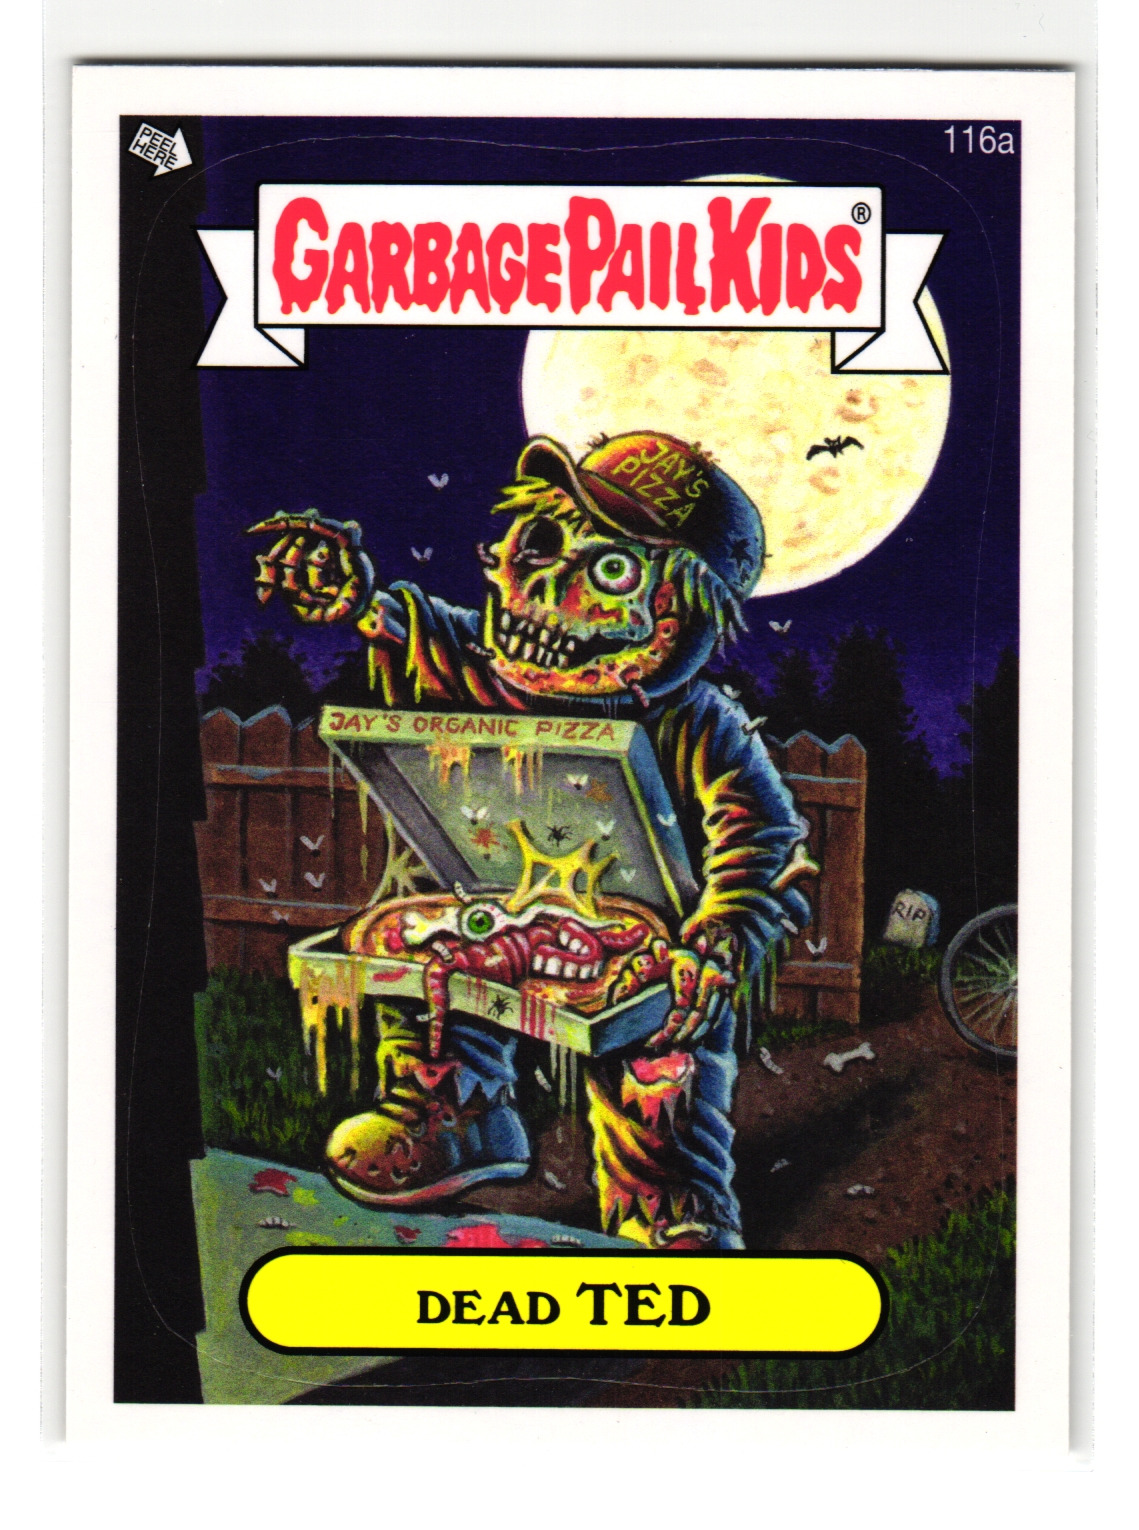 Dead Ted Sticker 2013 Topps Garbage Pail Kids Series 2 Card 116a